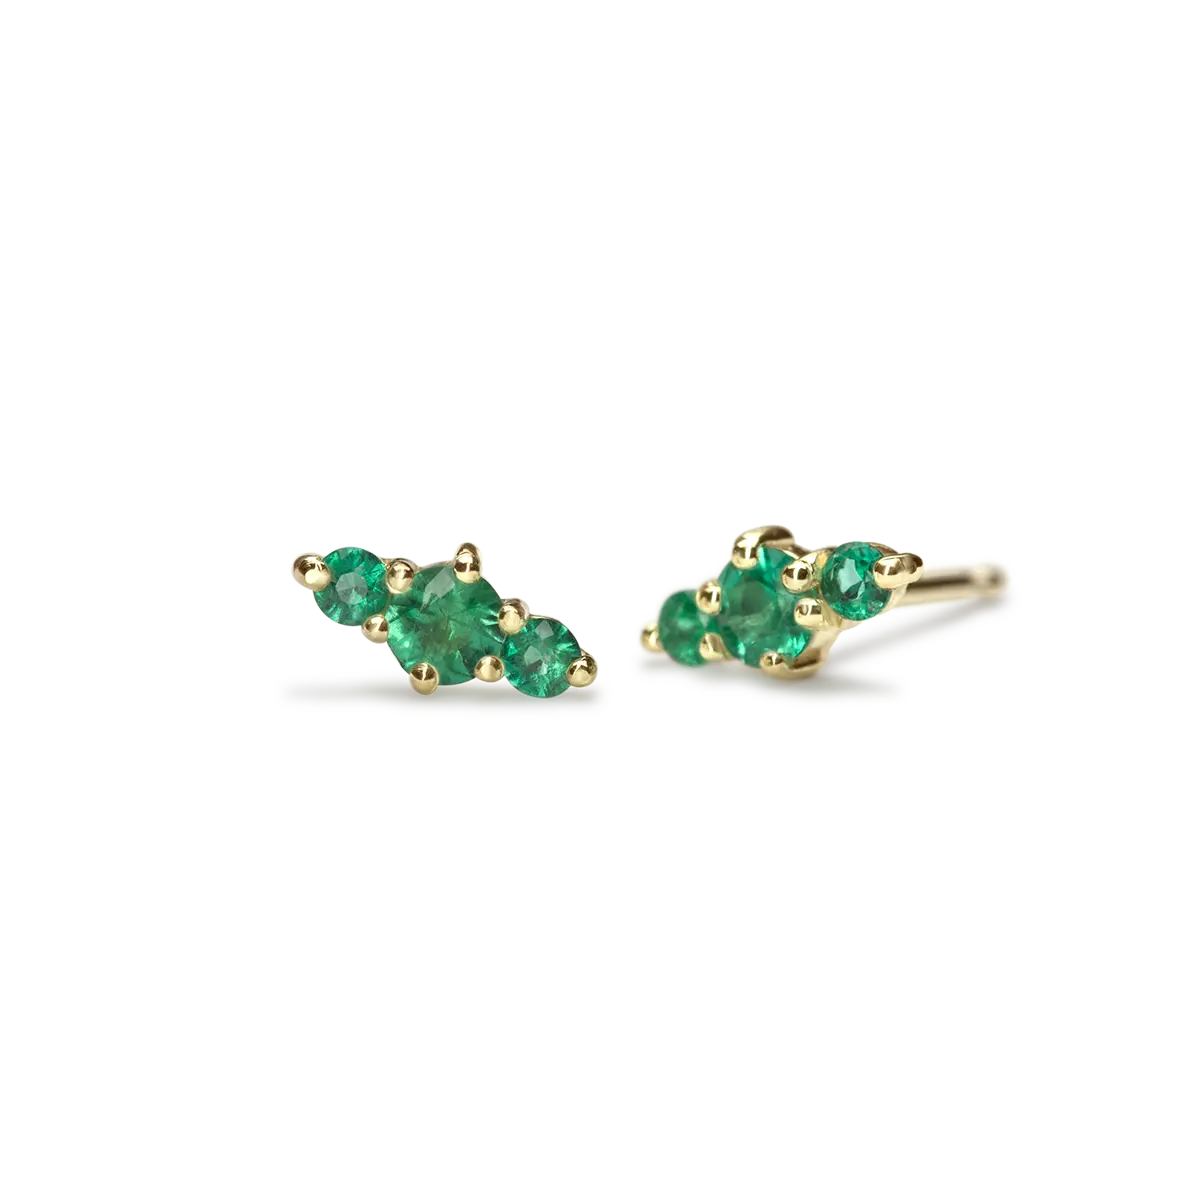 Three Emeralds that balance each other perfectly.  14K sustainable gold 0.25 tcw round emeralds  Dimensions: 3.5 x 7.3mm  Designed by Ila Collection